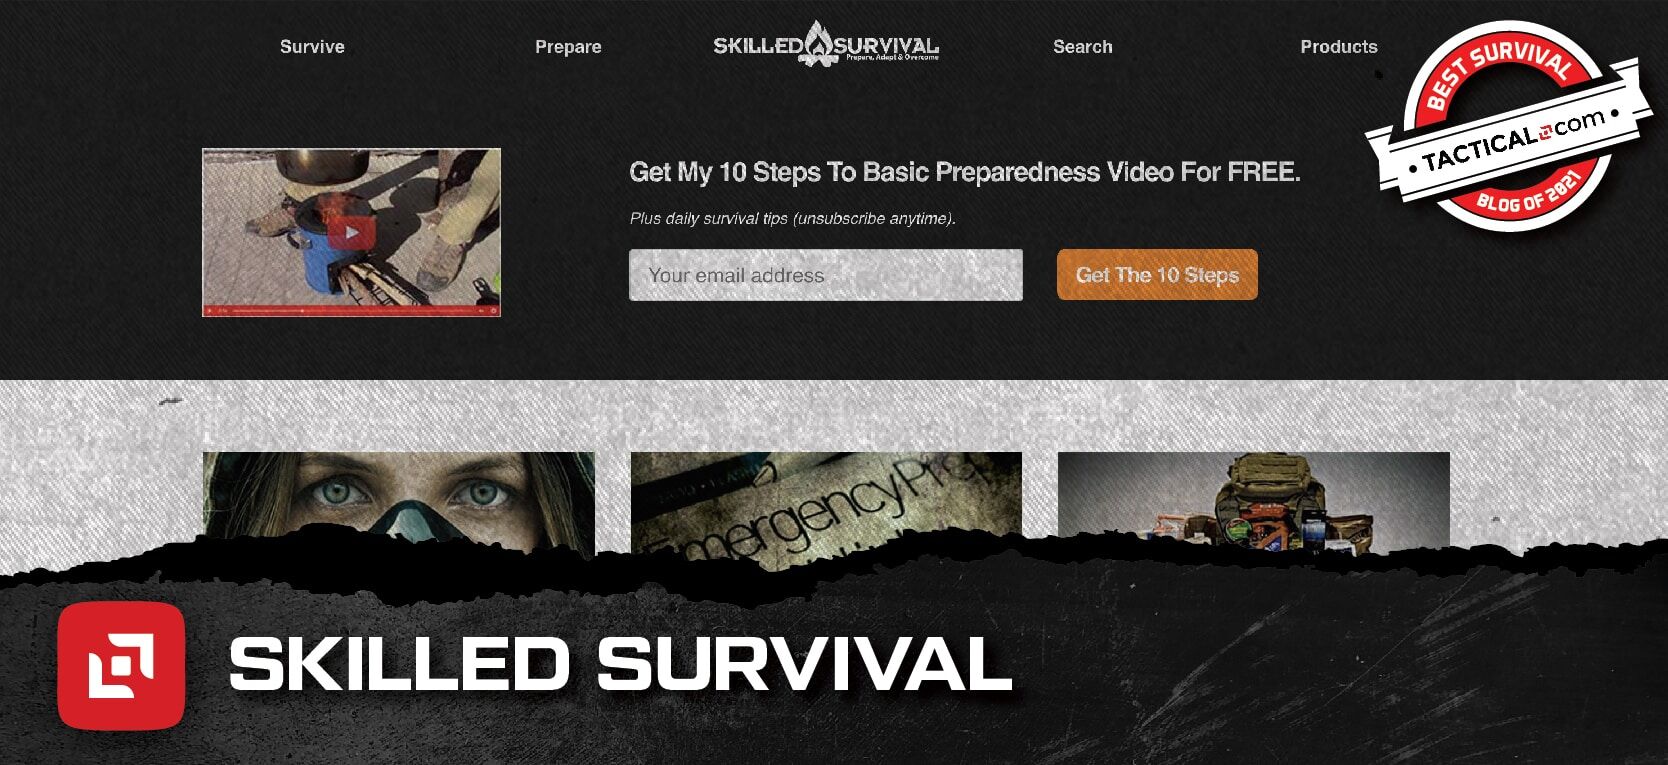 Skilled Survival is one of the top survival blogs we recommend reading